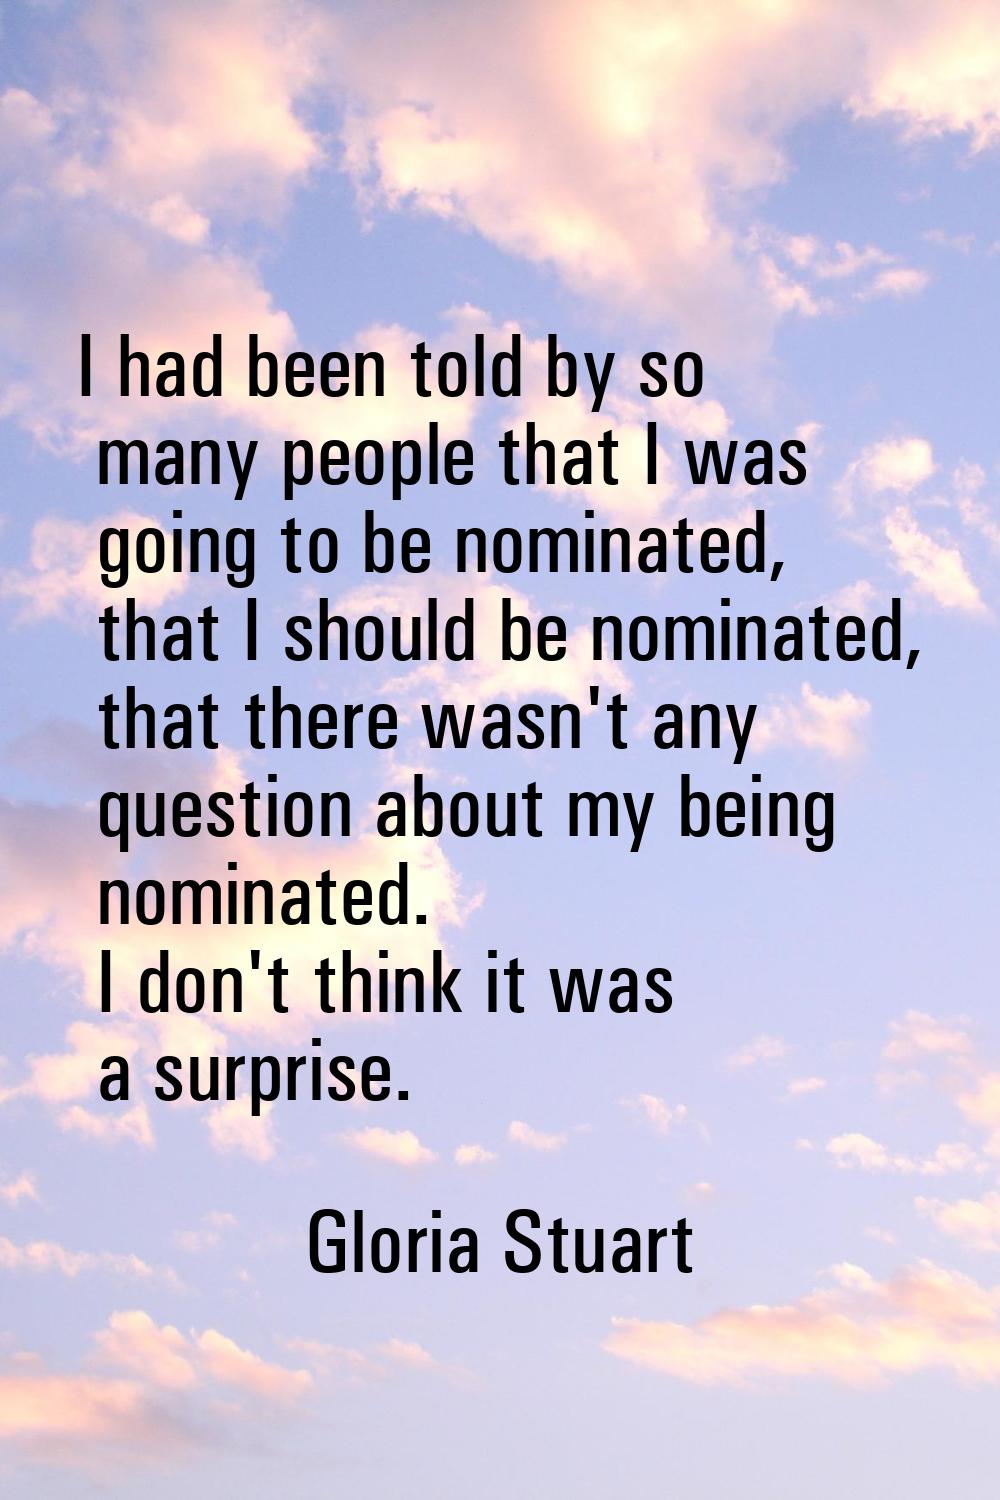 I had been told by so many people that I was going to be nominated, that I should be nominated, tha